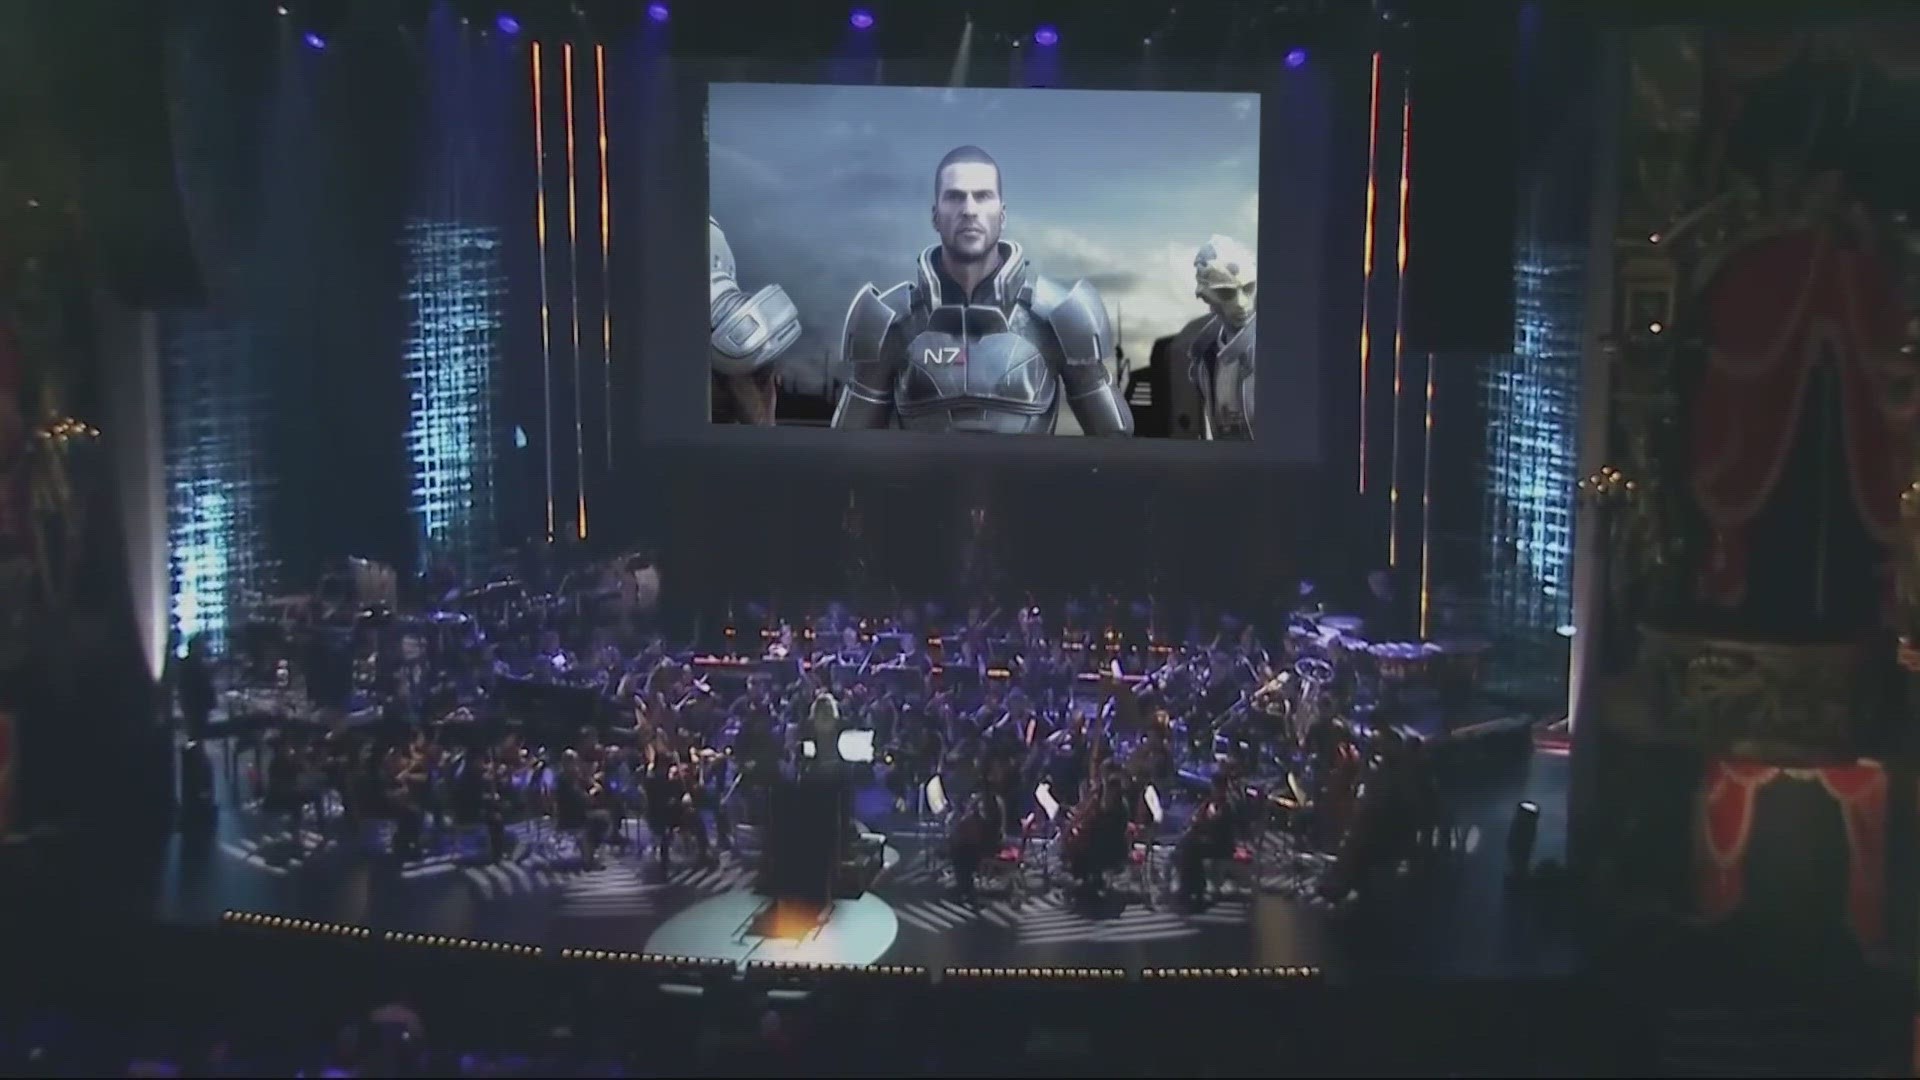 The Oregon Symphony is putting on a unique concert. It's called "Heroes: A Video Game Symphony" and it combines music and video games